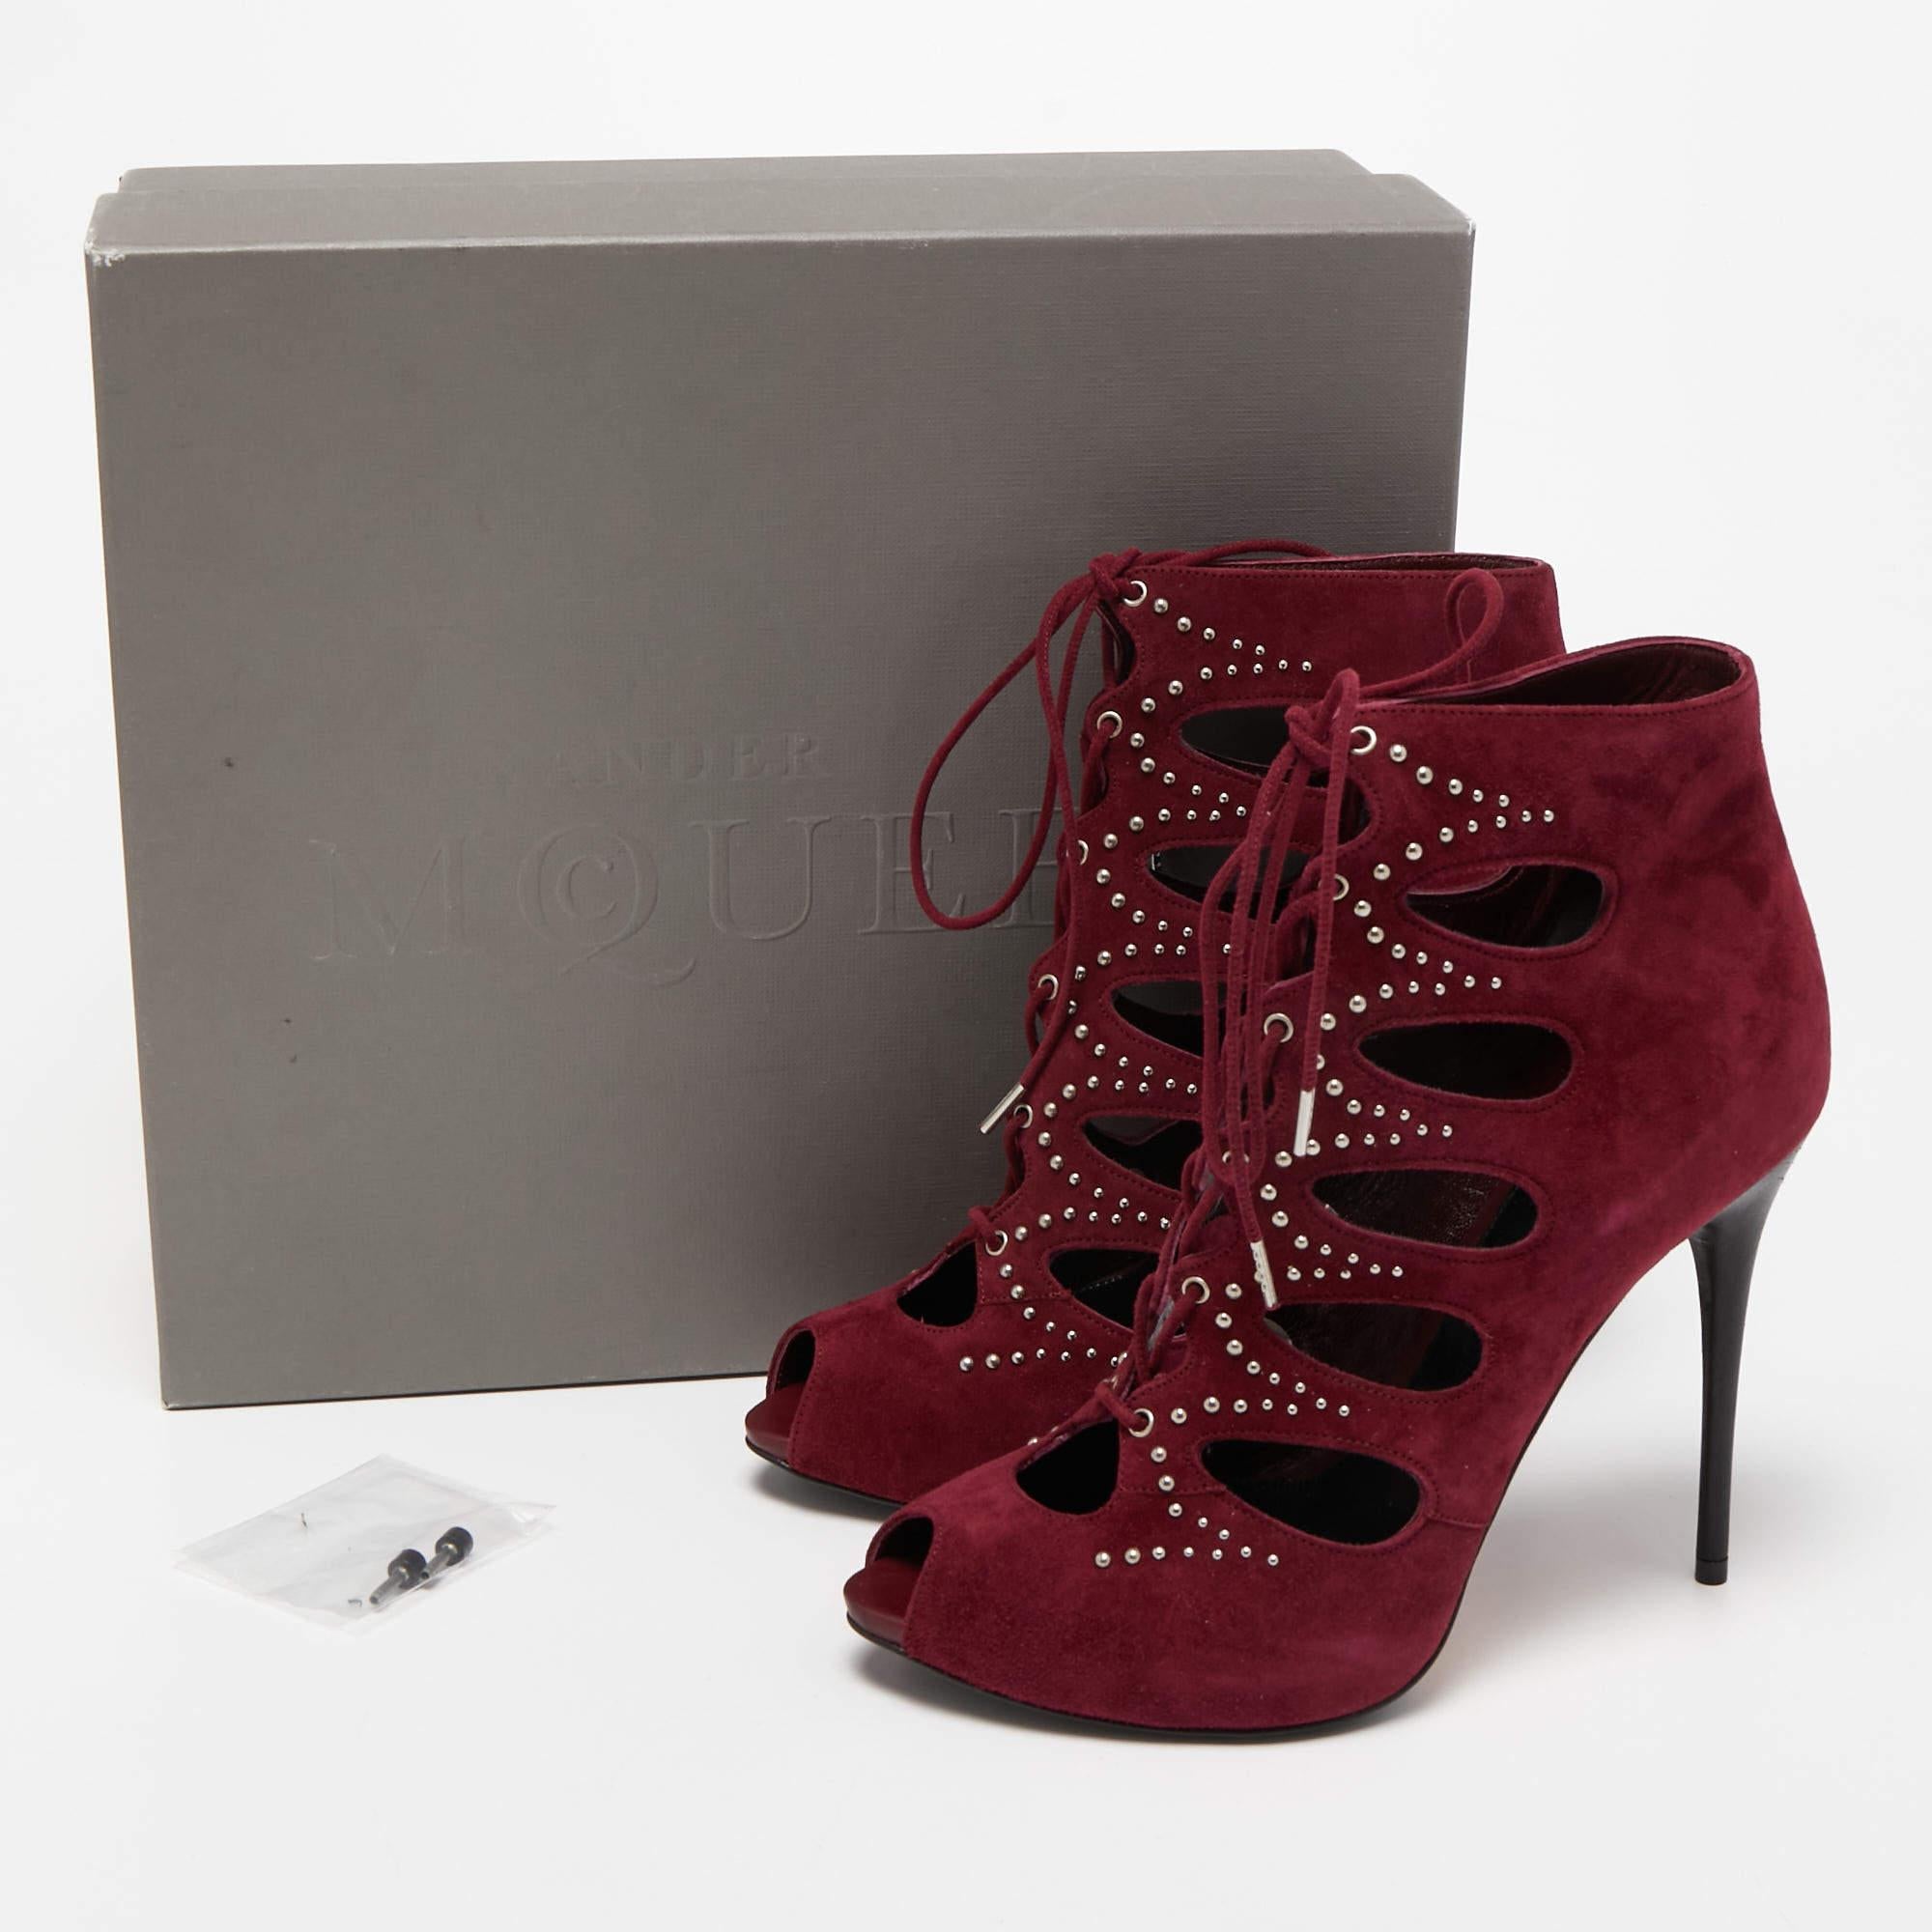 Alexander McQueen Burgundy Suede Cut Out Lace Up Ankle Booties Size 37.5 6